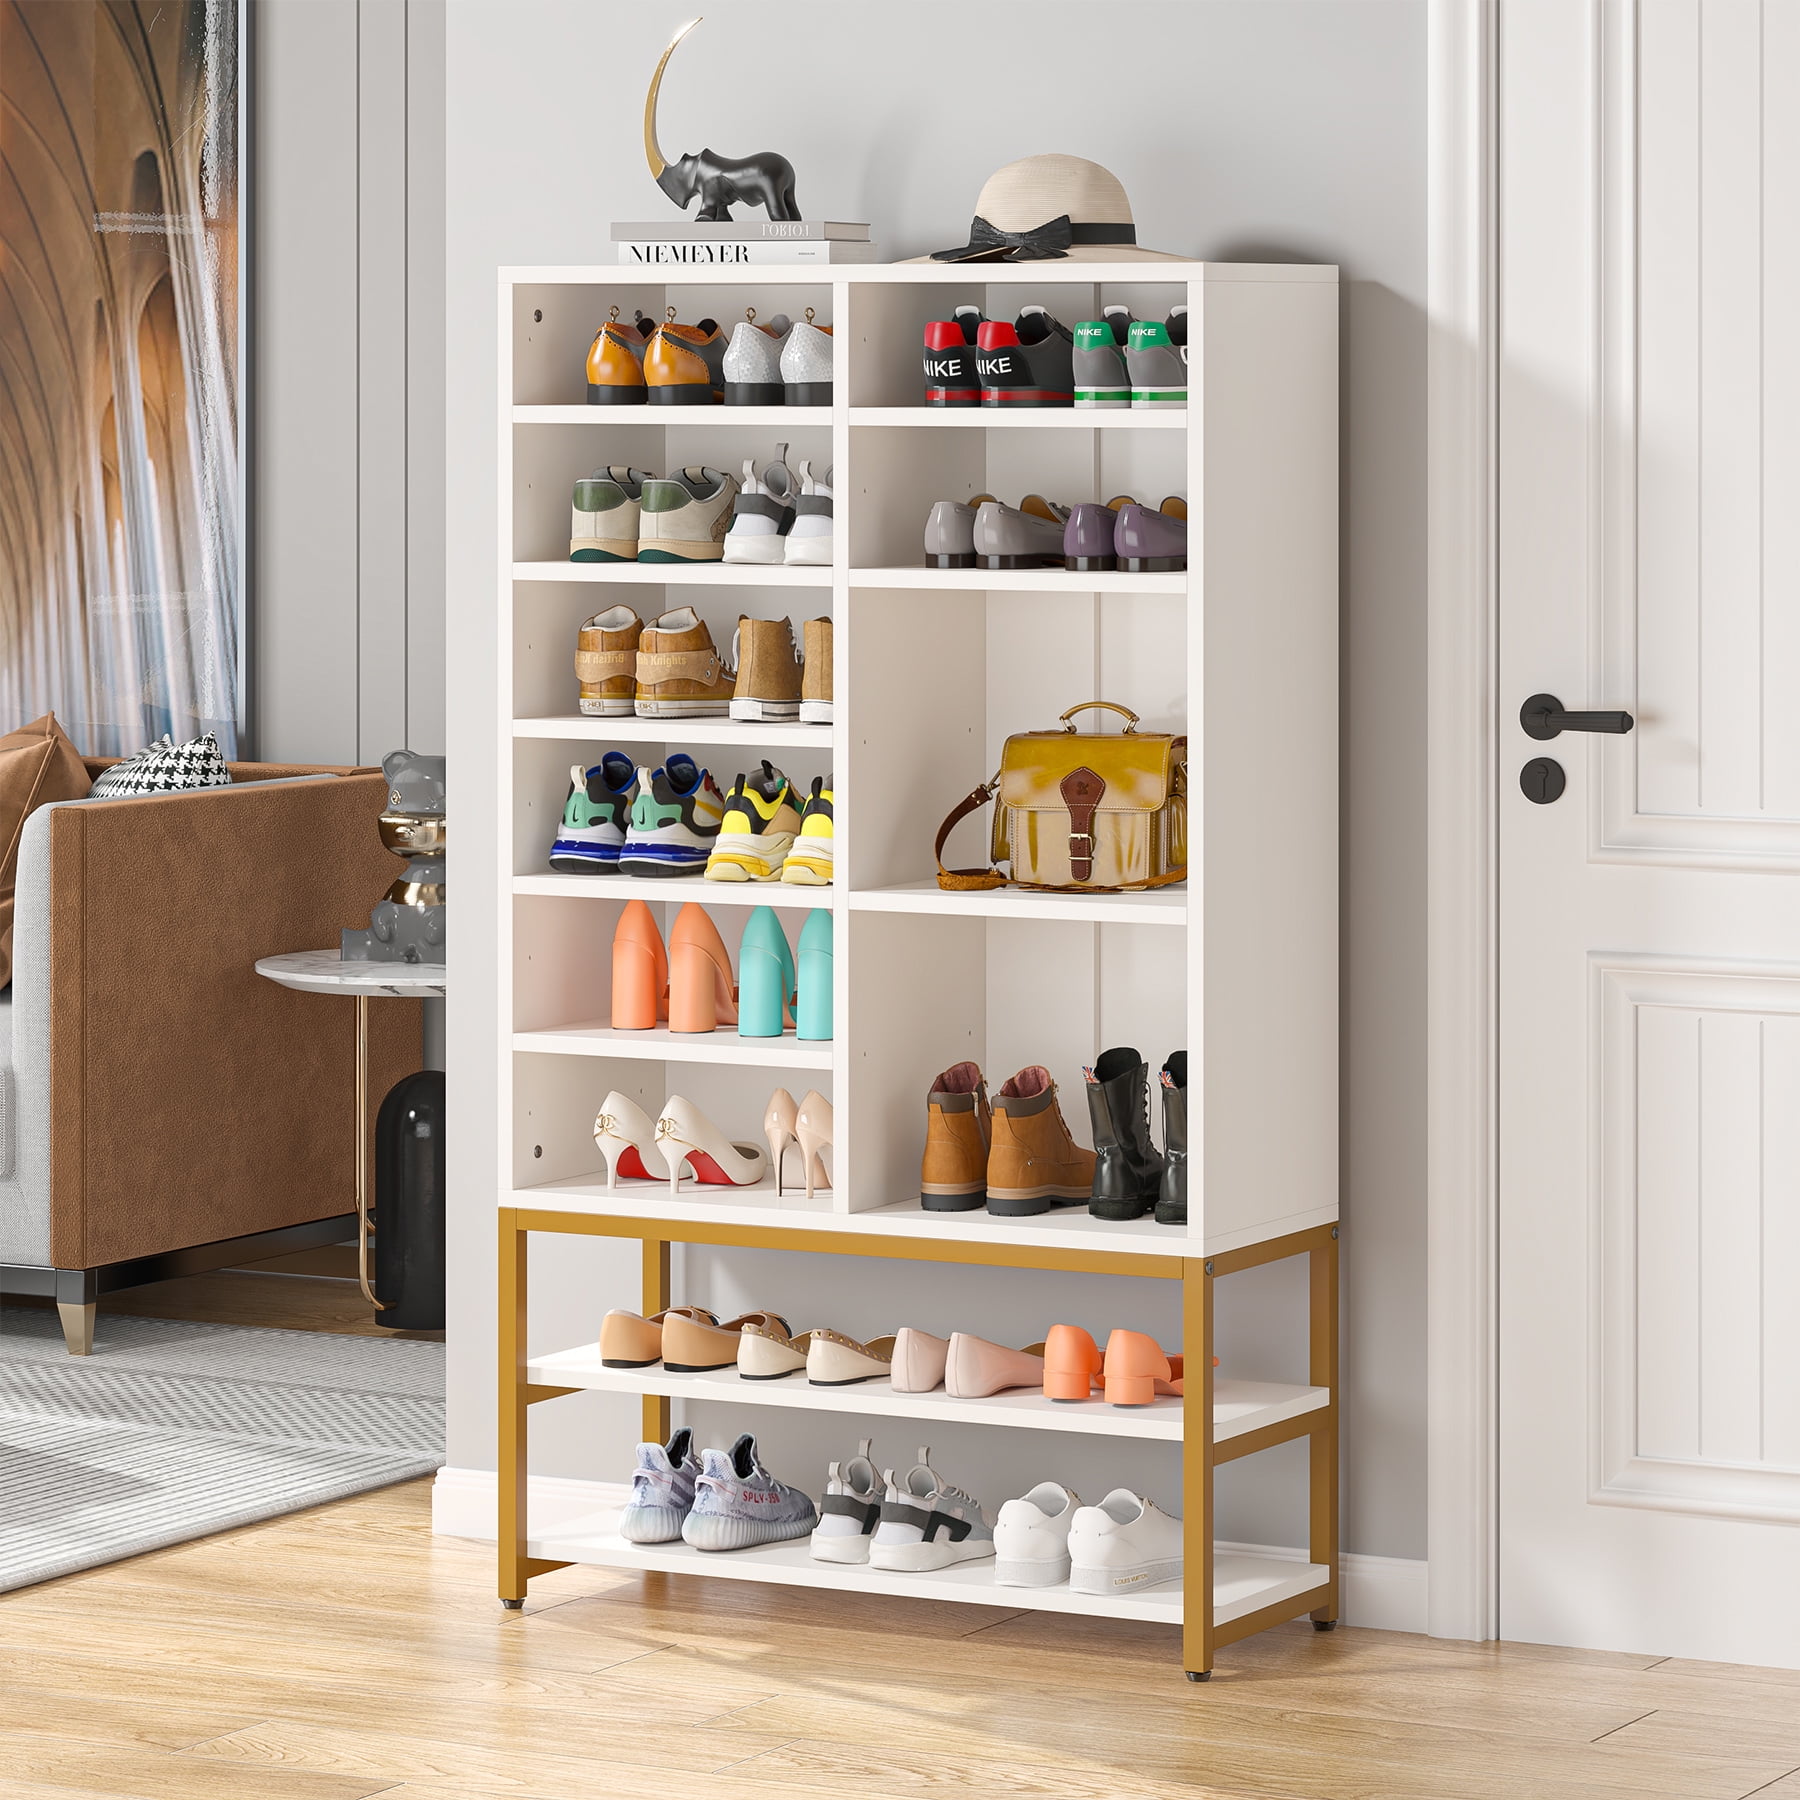 Freestanding Shoe Storage Cabinet Modern 28 Pairs Wood Shoe Rack with 10 Adjustable Compartments for Entryway Bedroom 7c0ef195 1fb7 4bae bdfa 21b830f63577.b12659f9bbade9e02a851ee9e45ebd0a